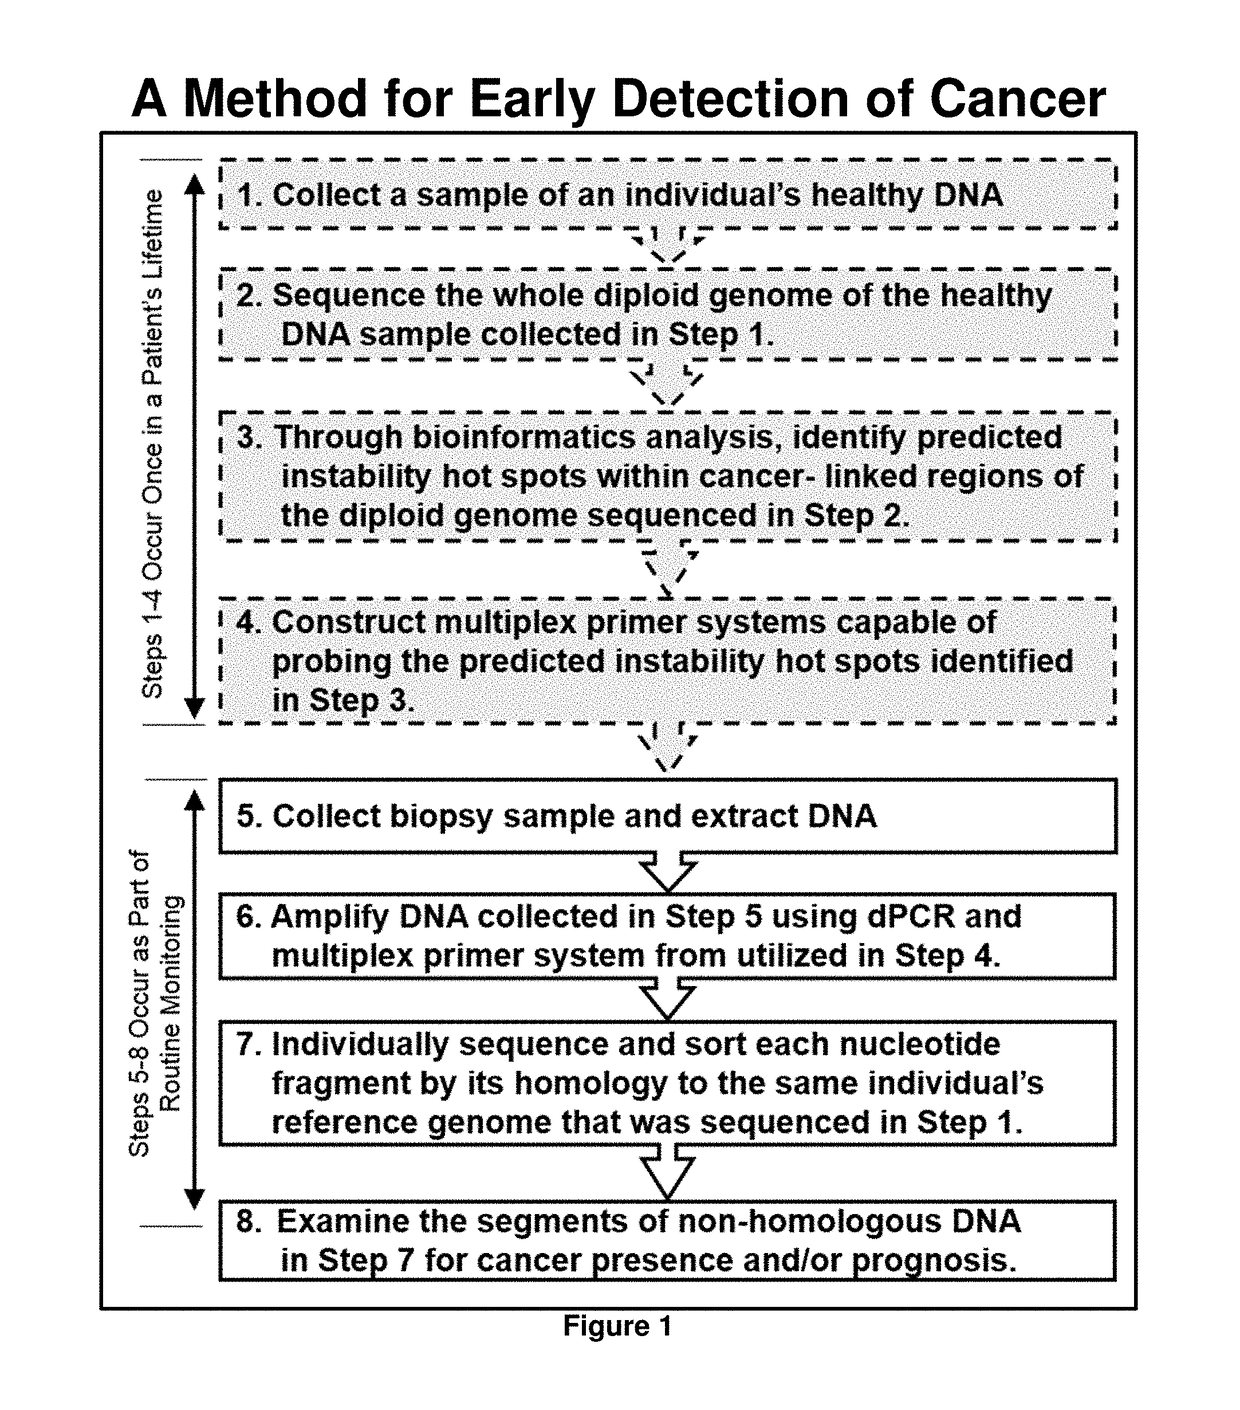 Clinical use of an <i>Alu </i>element based bioinformatics methodology for the detection and treatment of cancer